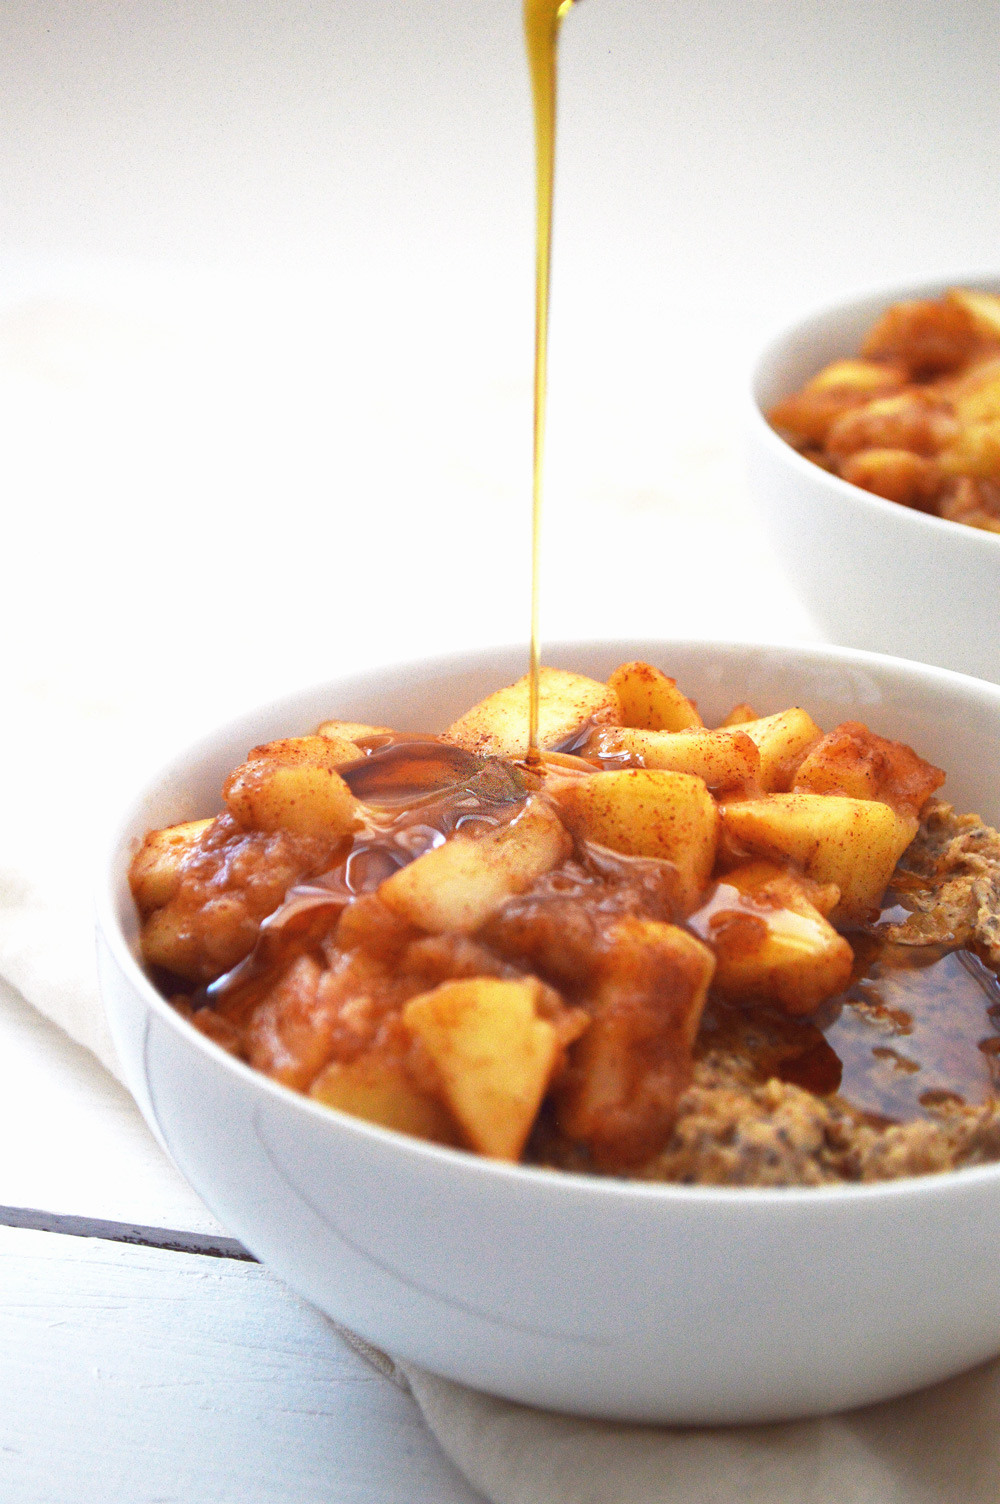 Almond Overnight Oats with Warm Cinnamon Apples